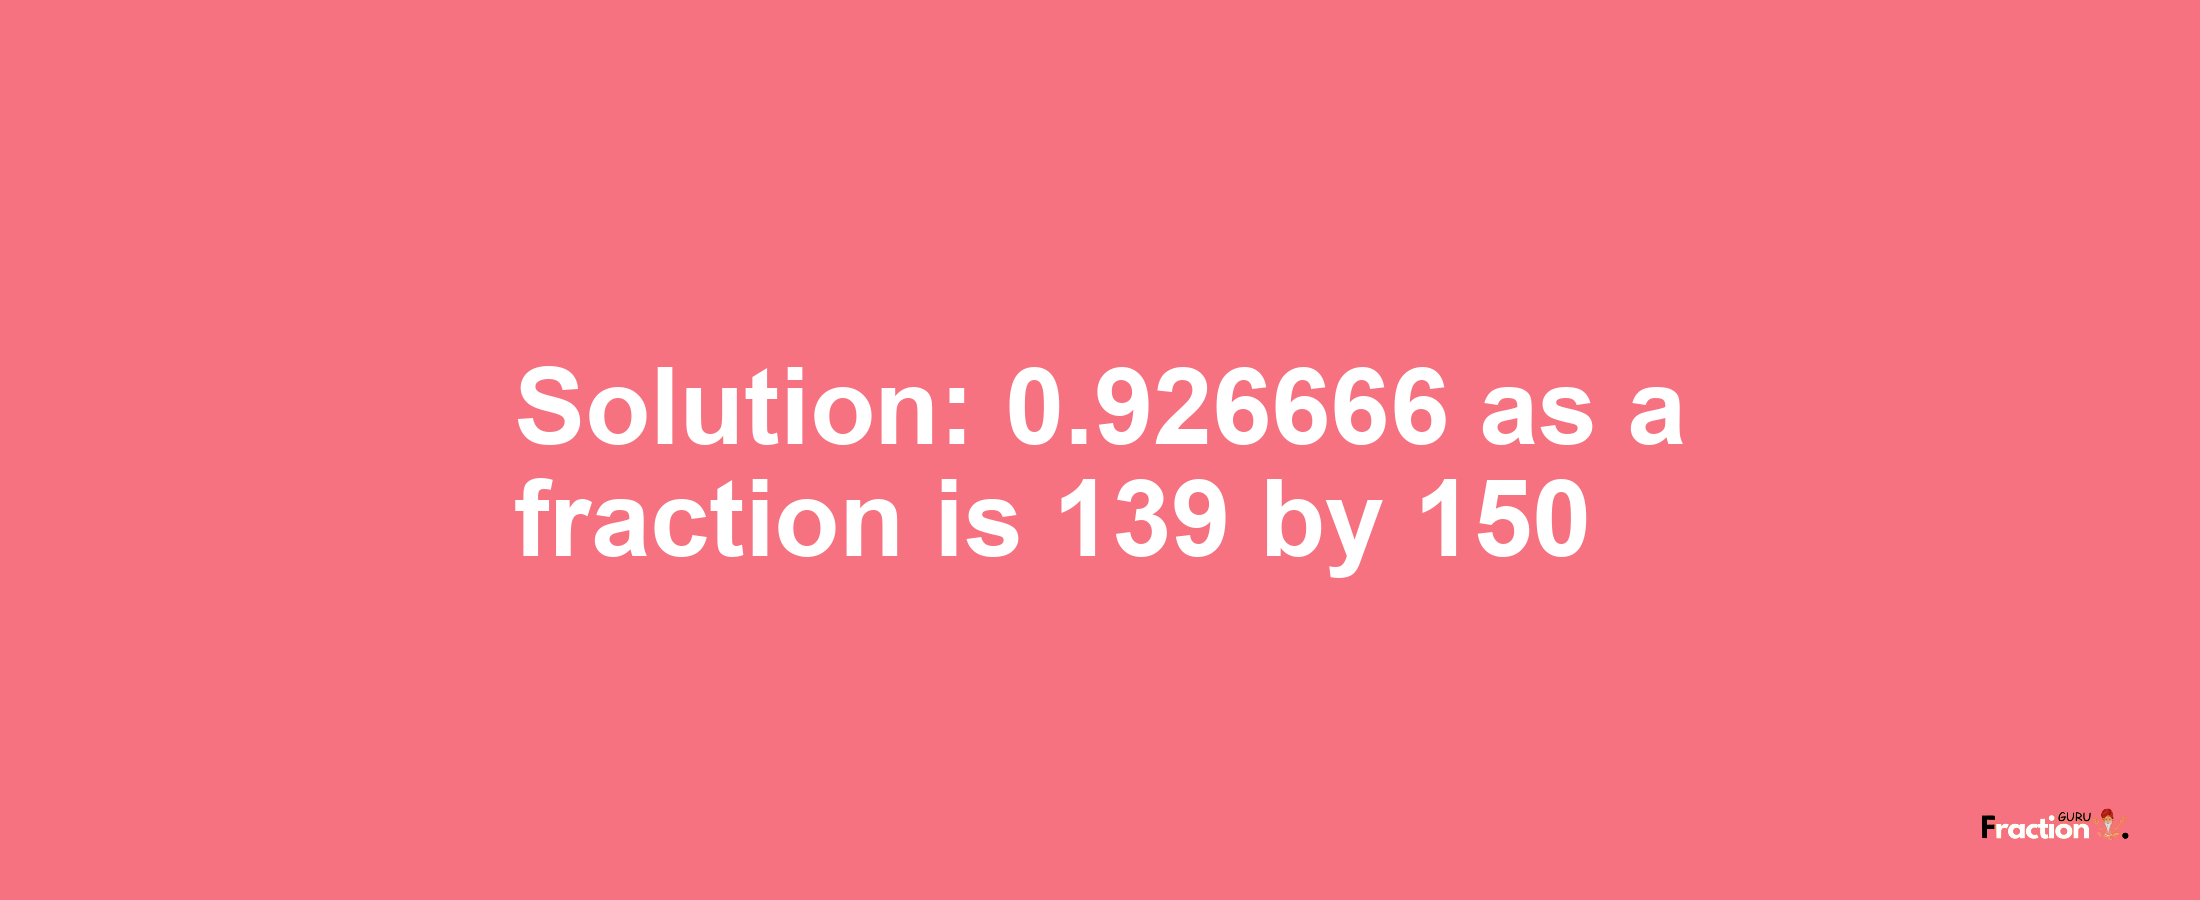 Solution:0.926666 as a fraction is 139/150